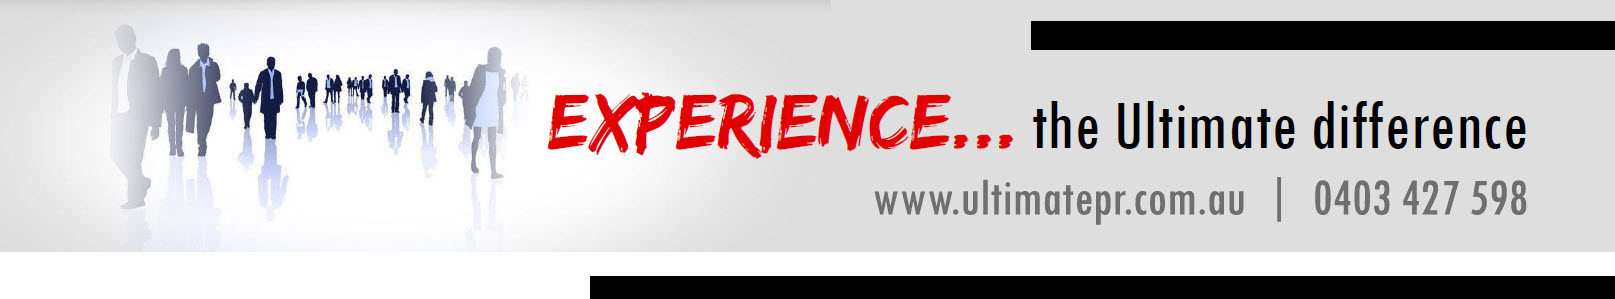 UPR website banner option 2019 clients experience the difference